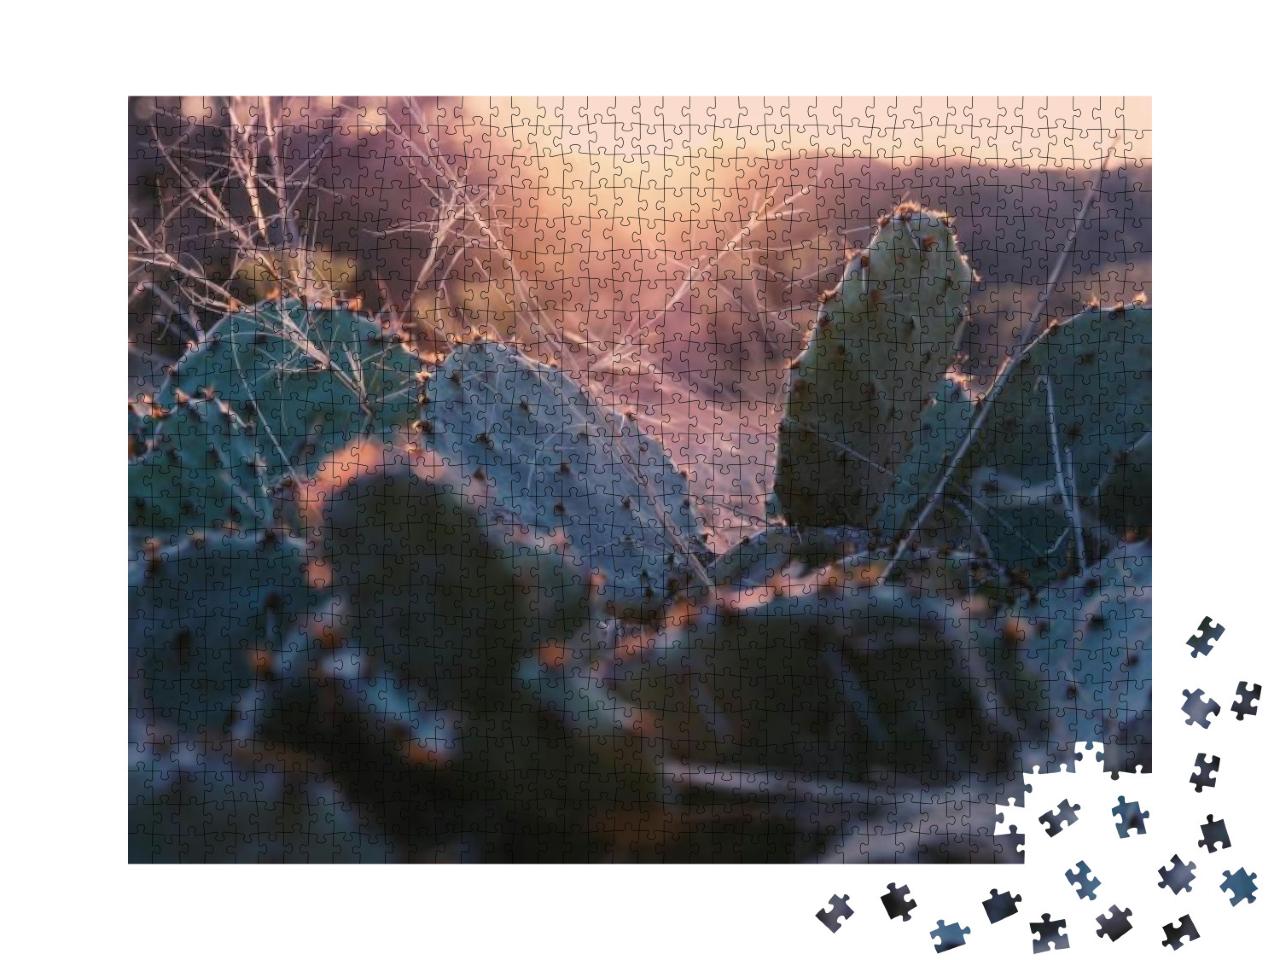 Prickly Pear Cactus with Blurred Foreground in Scenic Tex... Jigsaw Puzzle with 1000 pieces